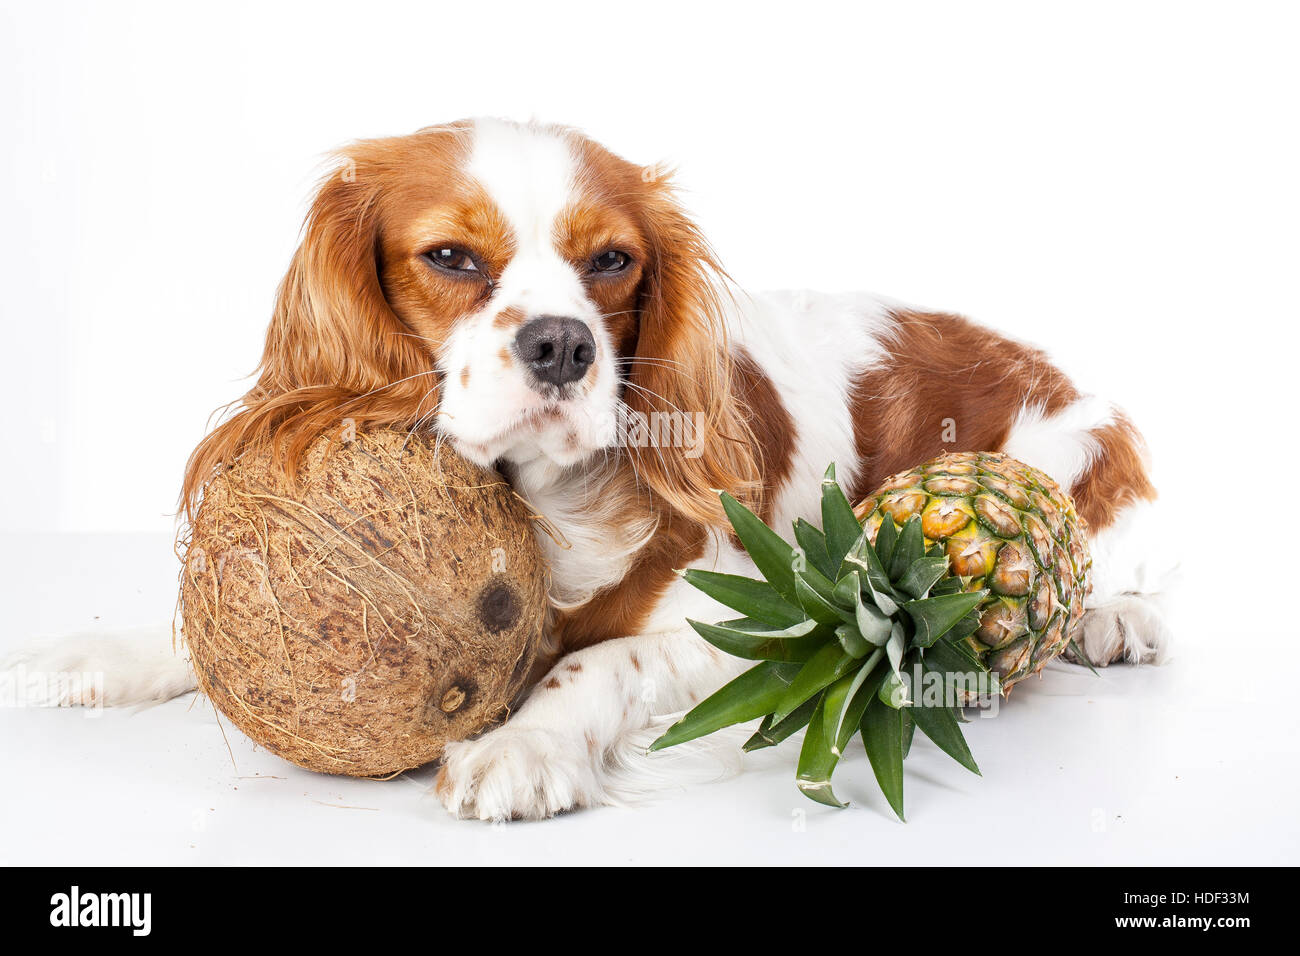 Can dogs eat fruit illustration. Tropical fruit and cavalier king charles spaniel dog. Dog with fruit food. Dog health care. Stock Photo